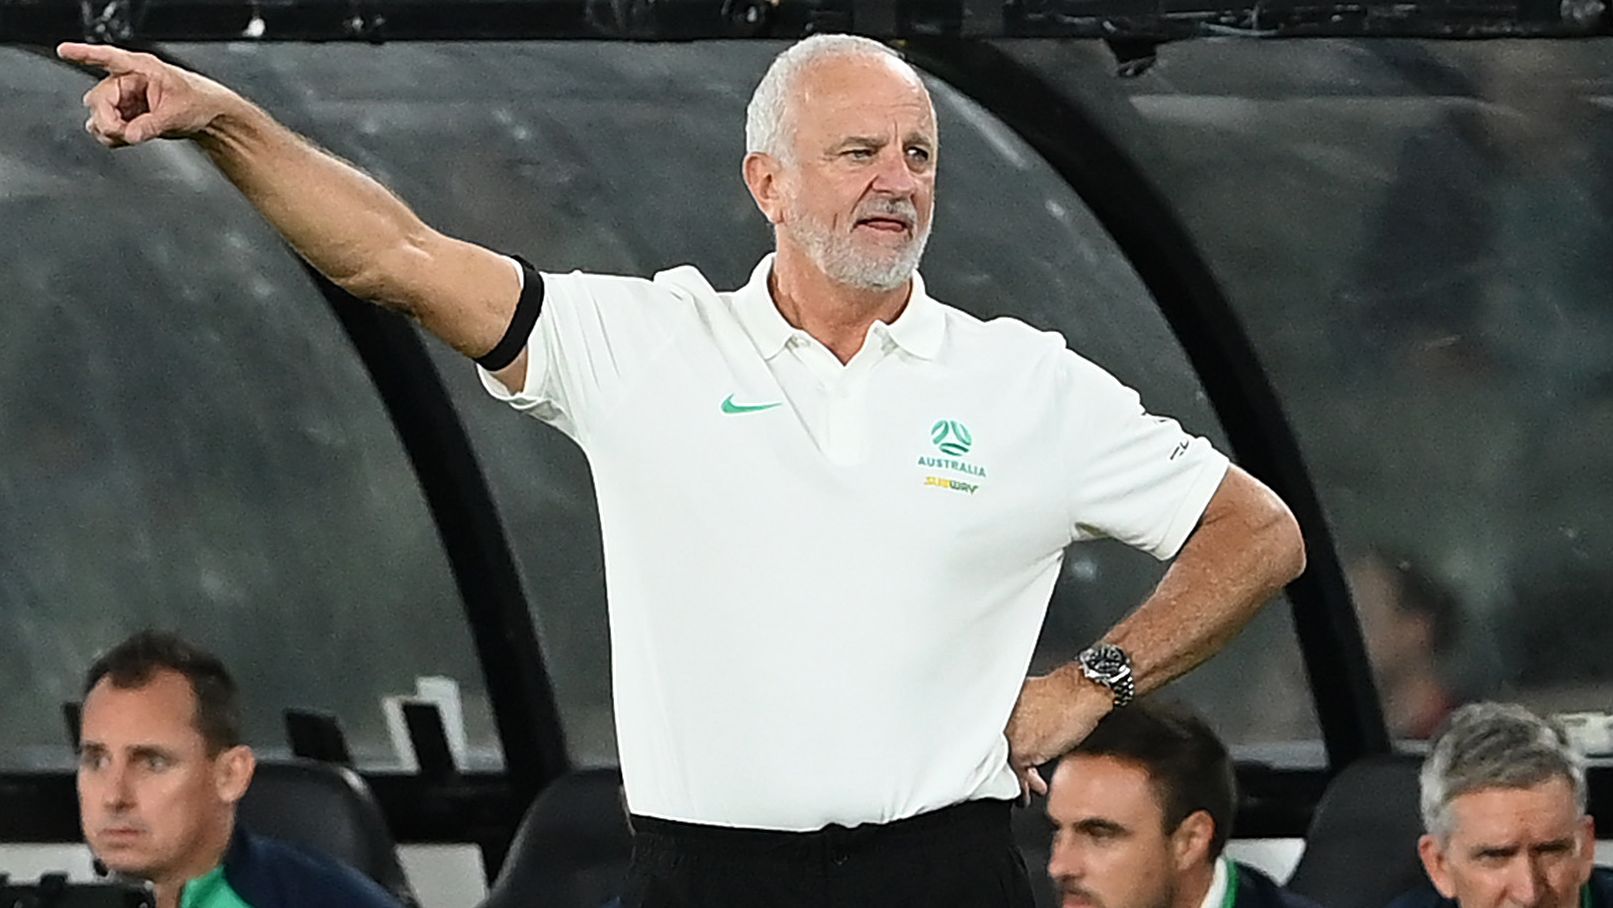 MELBOURNE, AUSTRALIA - MARCH 28: Graham Arnold the head coach of Australia yells instructions during the International Friendly match between the Australia Socceroos and Ecuador at Marvel Stadium on March 28, 2023 in Melbourne, Australia. (Photo by Quinn Rooney/Getty Images)